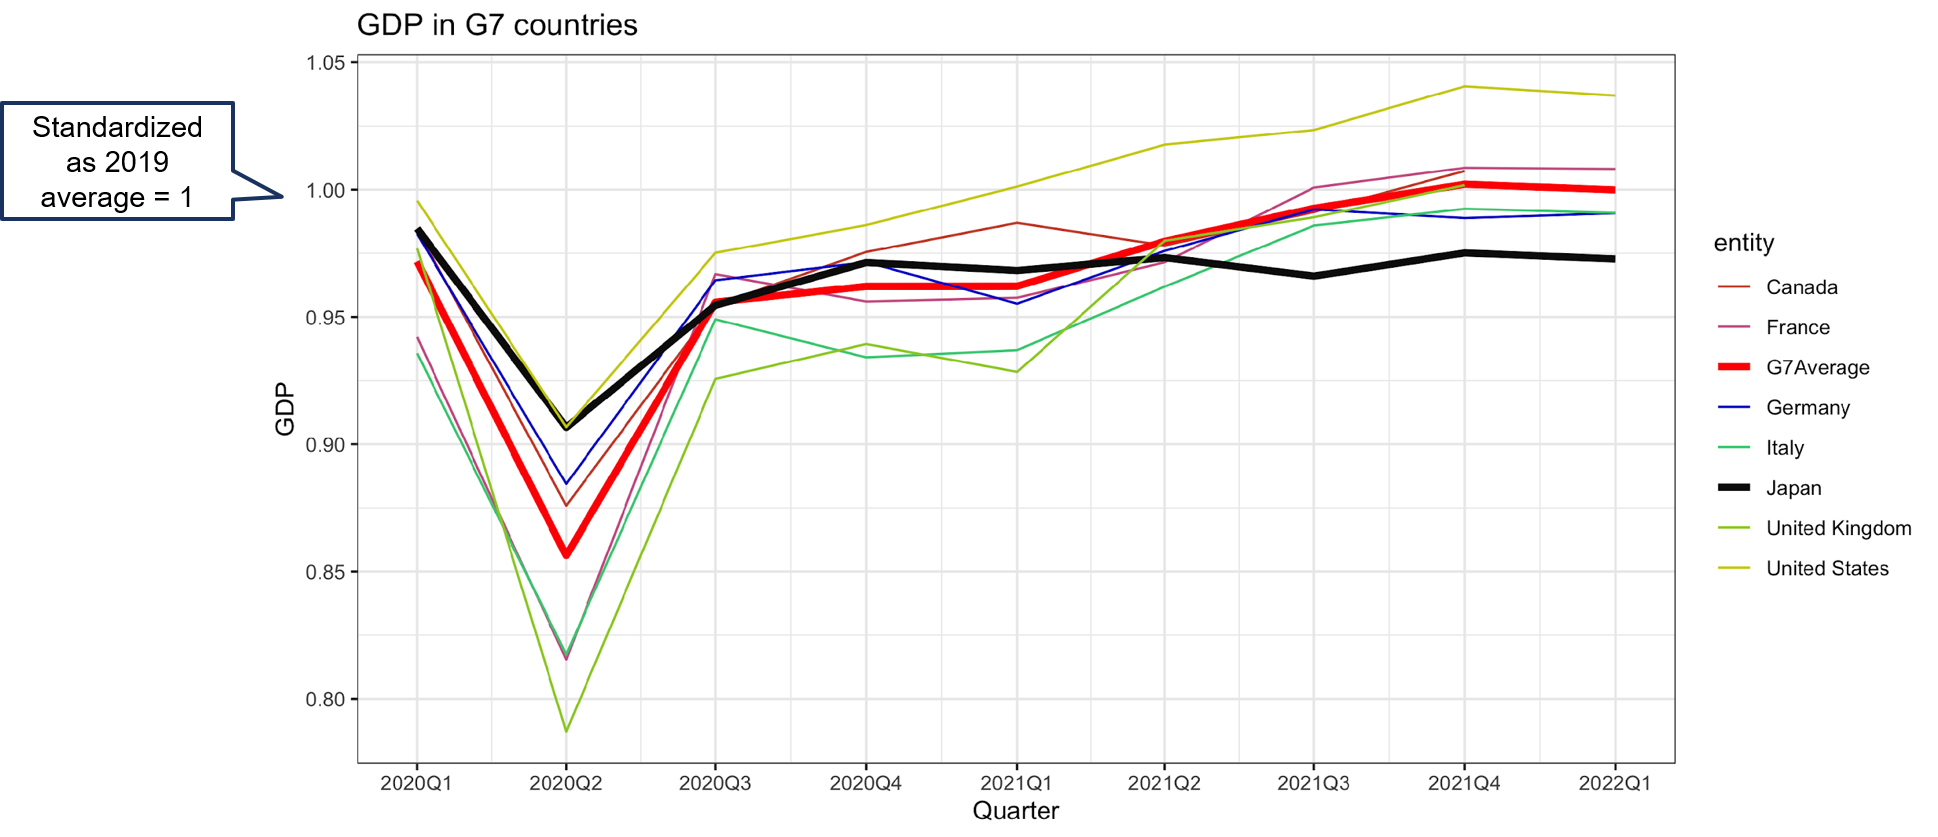 Trend in quarterly GDP by country (standardized as 2019 average = 1): G7